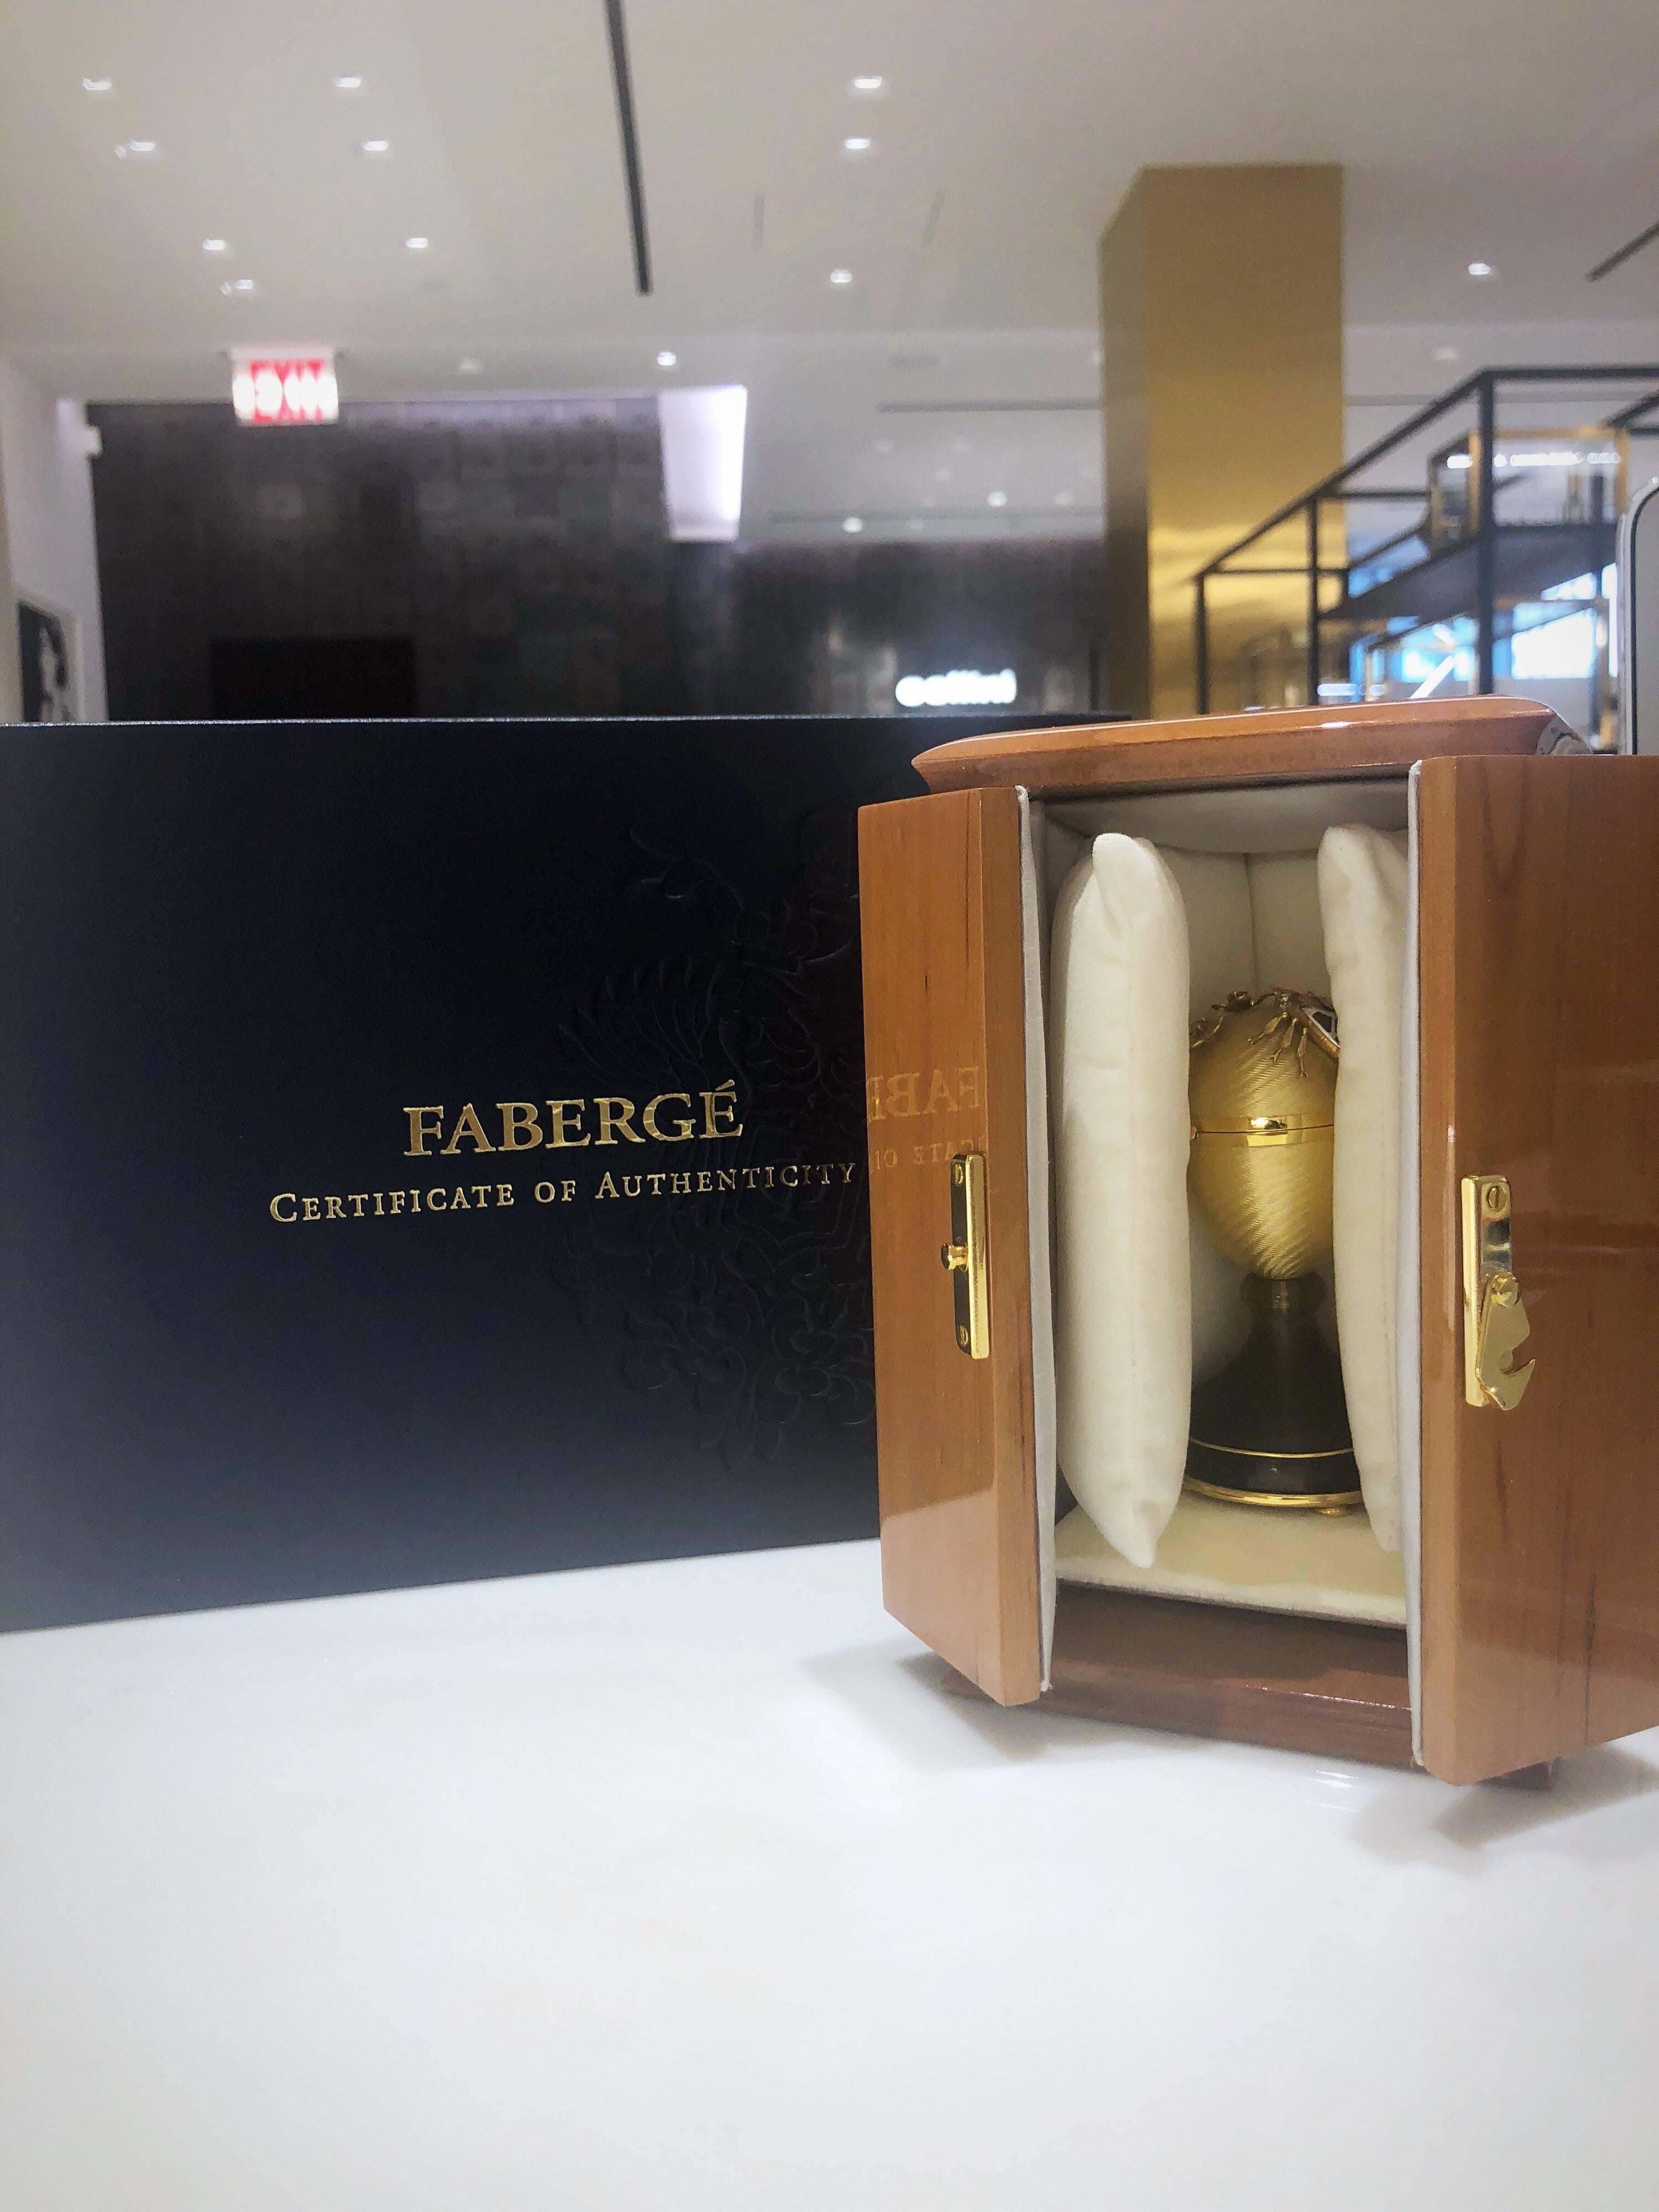 Modernes Faberge Emaille Gold Limited Edition Überraschungsbär-Ei Made in Germany im Zustand „Neu“ in New York, NY